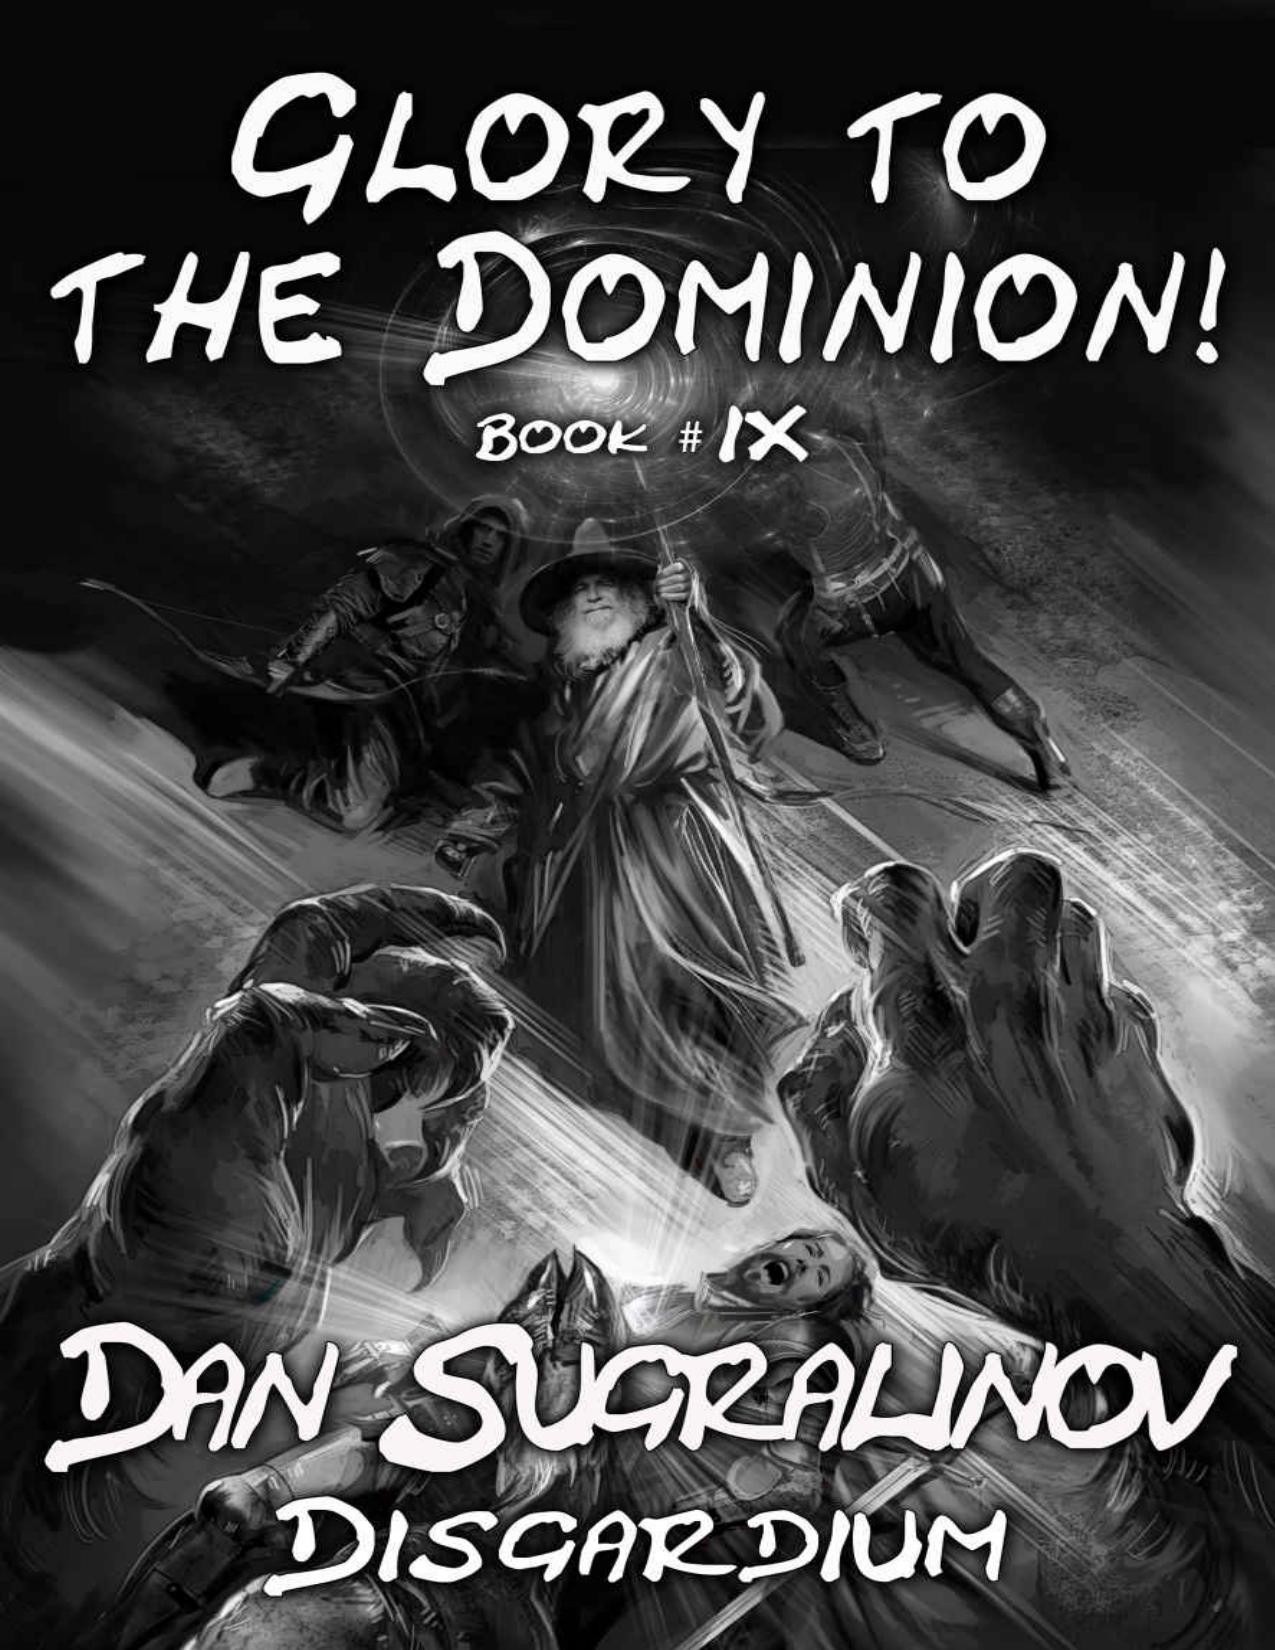 Glory to the Dominion!